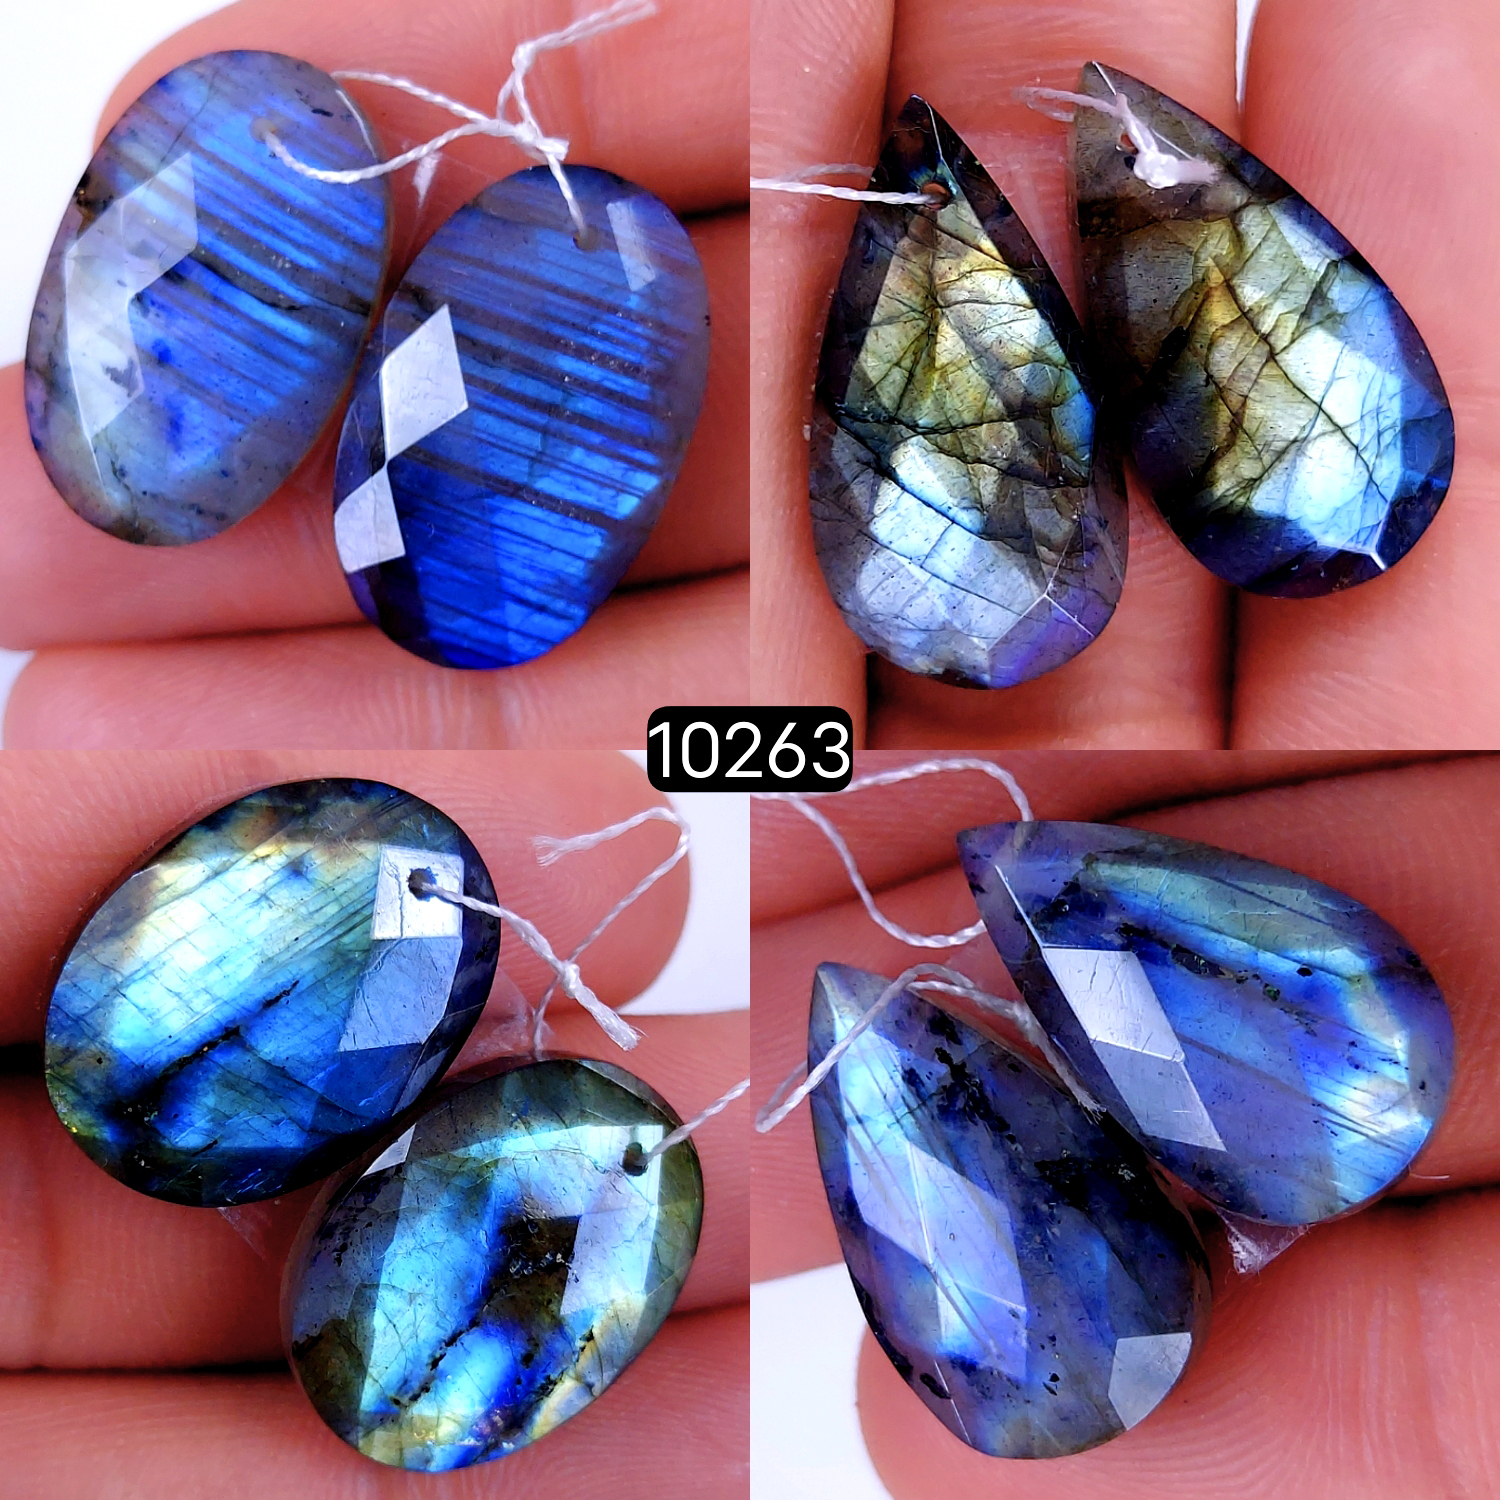 4Pair 133Cts Natural Labradorite Faceted Crystal Drill Dangle Drop Earring Pairs Silver Earrings Rose cut Labradorite Hoop Jewelry  25X12 22X12mm #10263